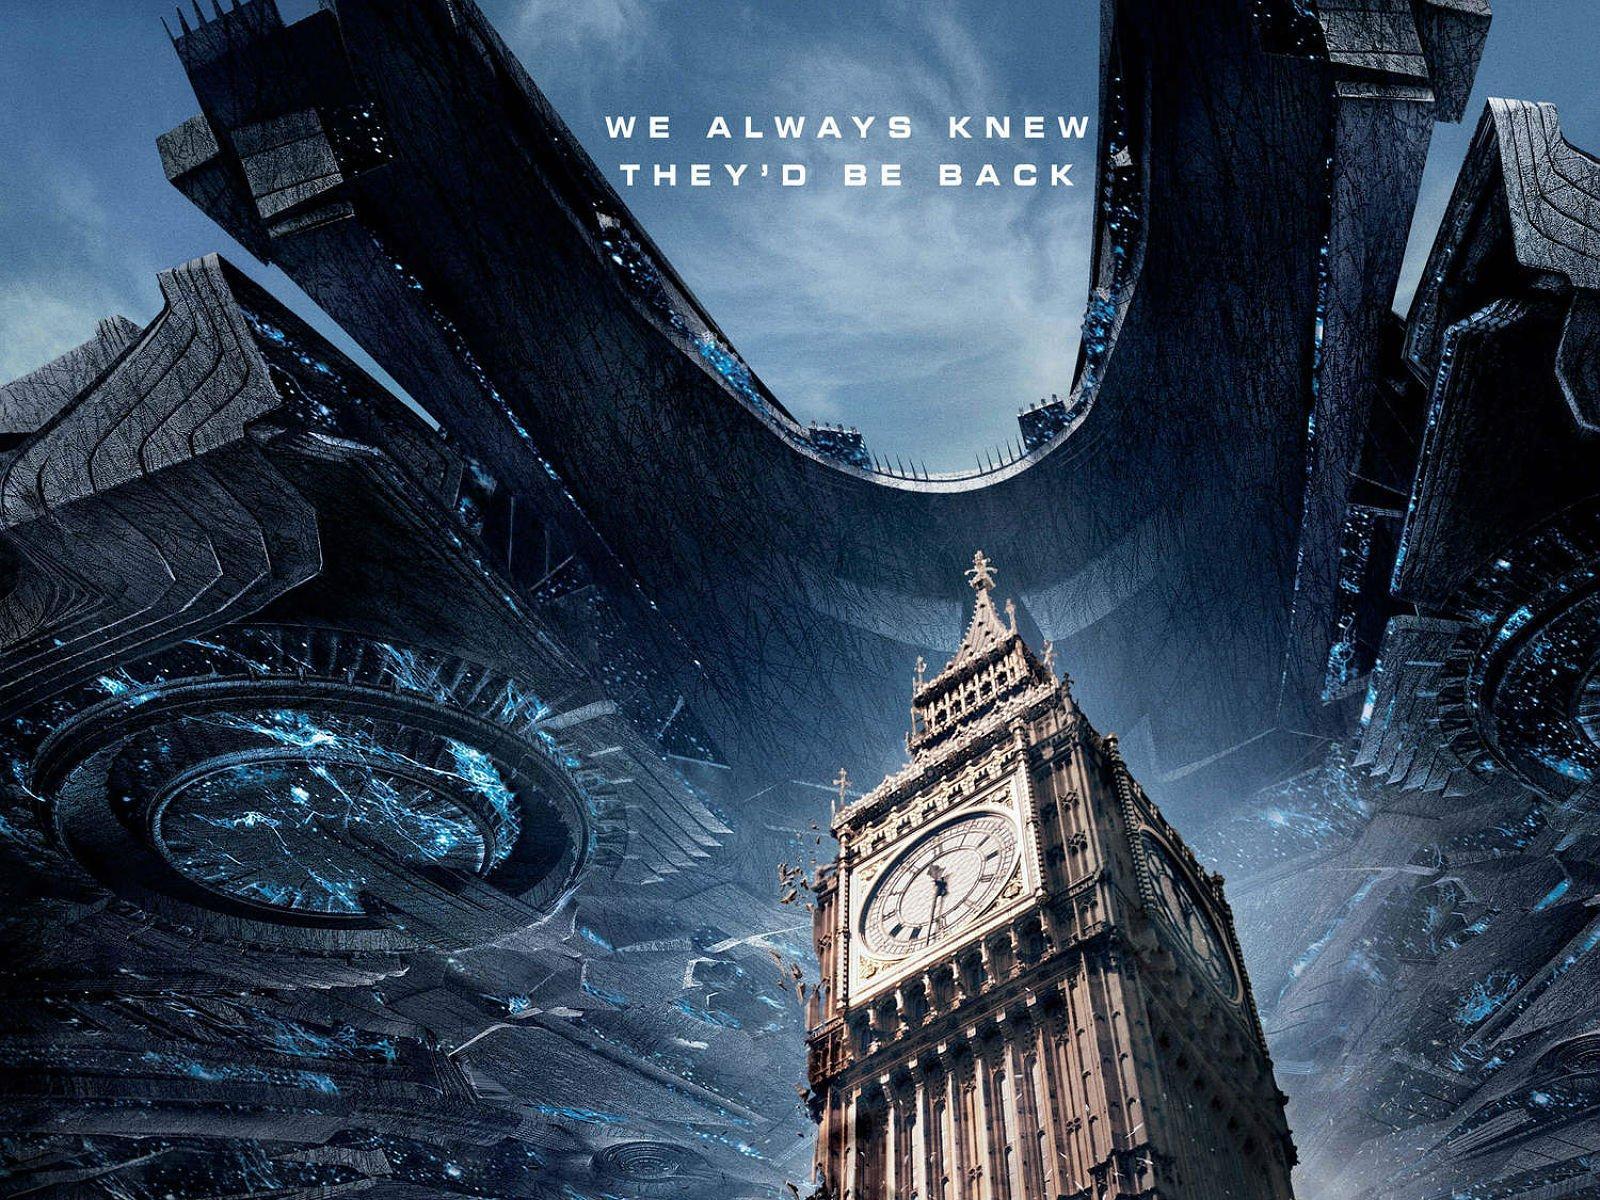 poster, Independence, Day, Resurgence, Sci fi, Futuristic, Action